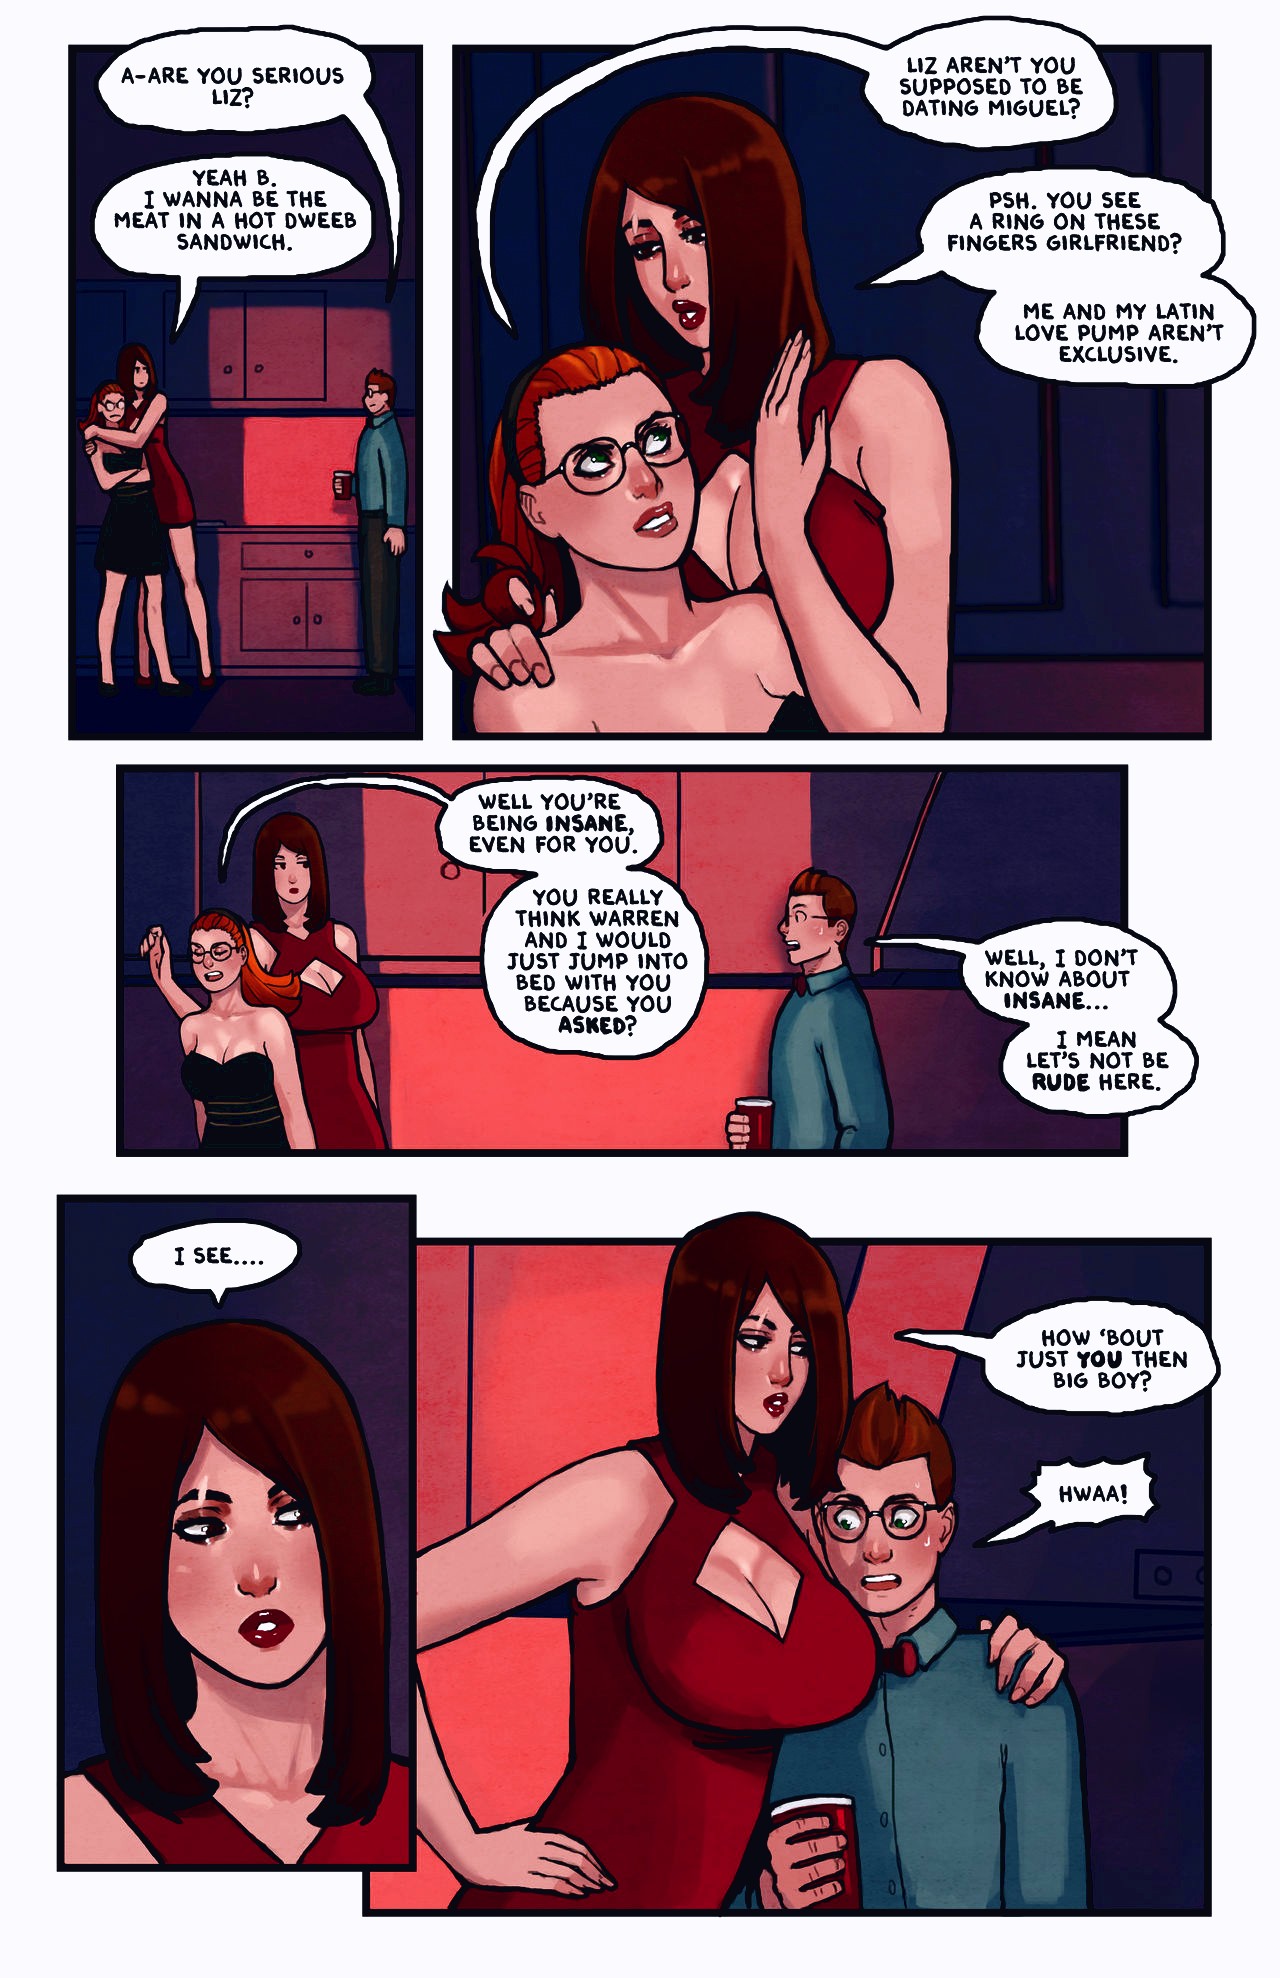 This Romantic World page 069